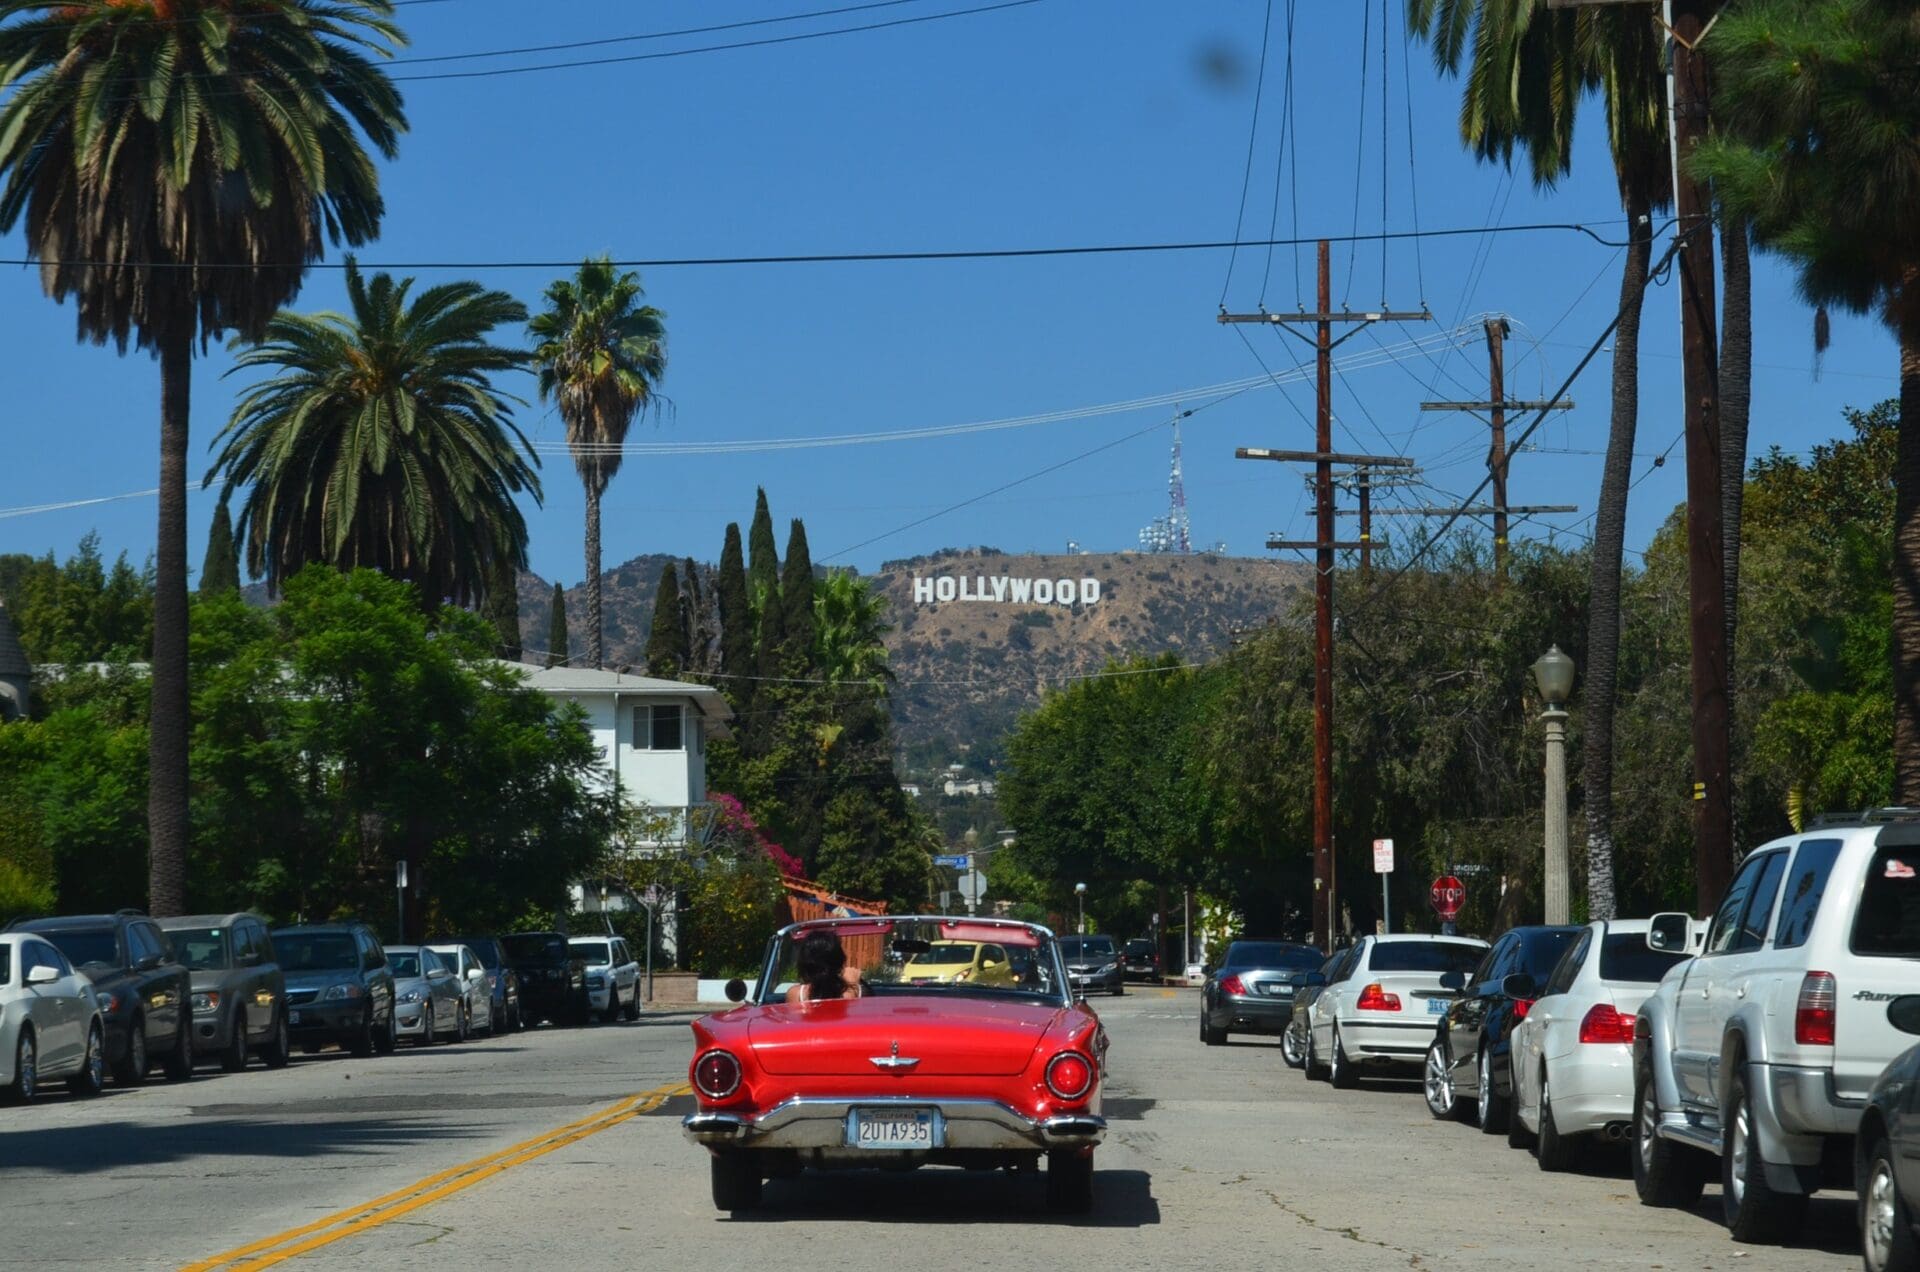 Hollywood Travel Guide